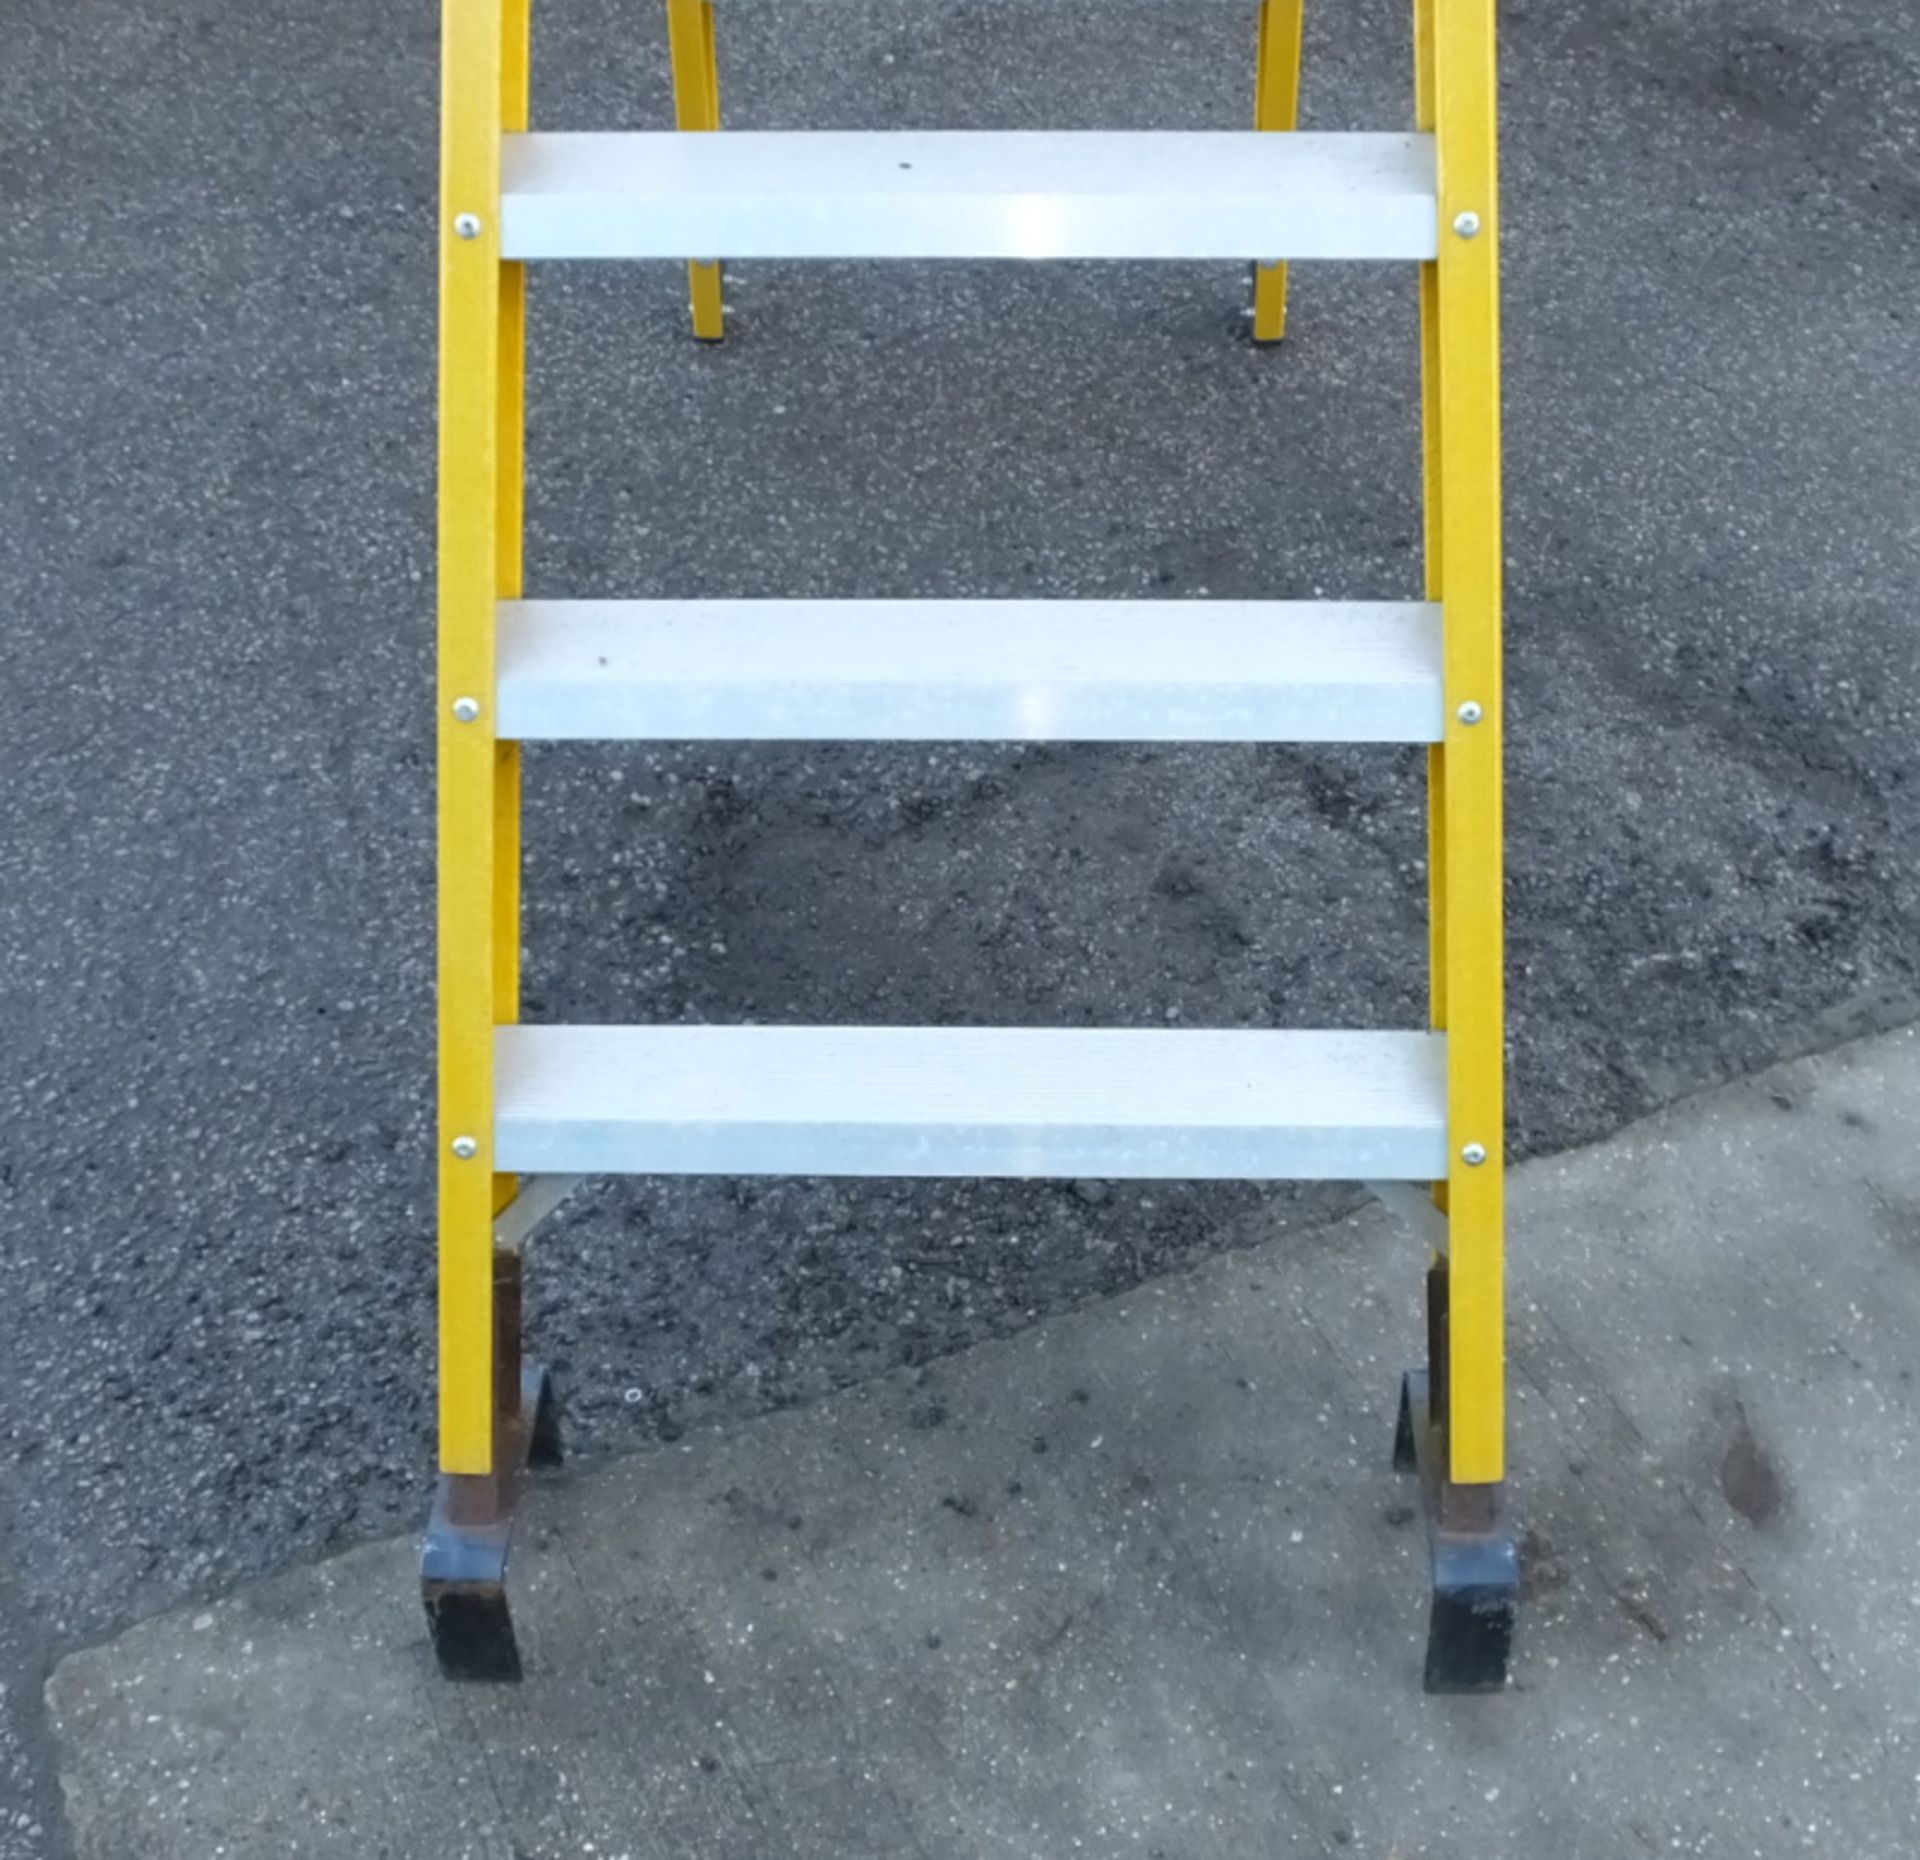 Bratts Ladders 5 Prong Step Ladder - Image 2 of 5